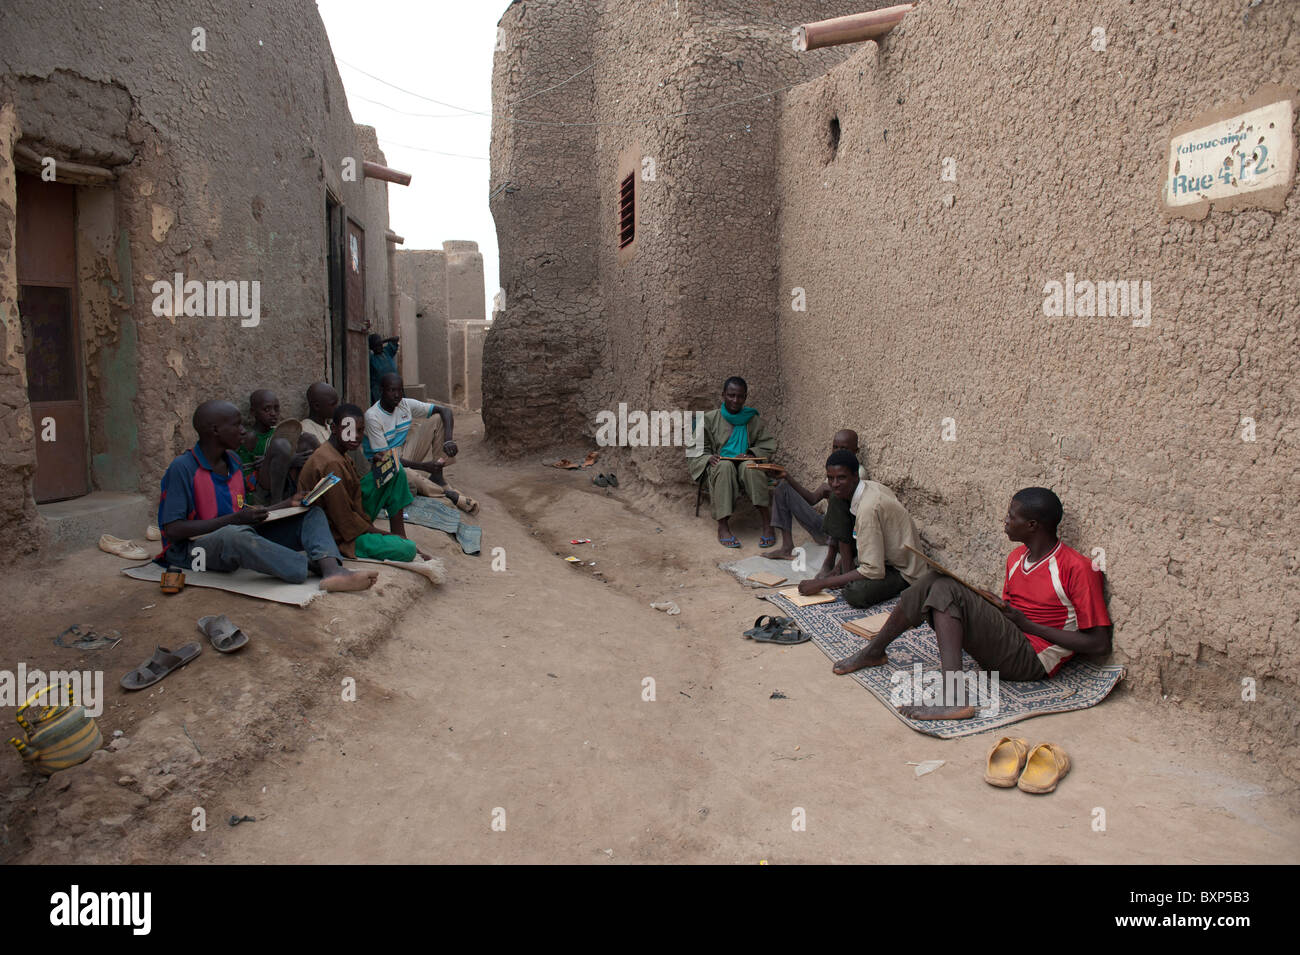 Young students in an outdoor Koran school . Djenné, Mali Stock Photo